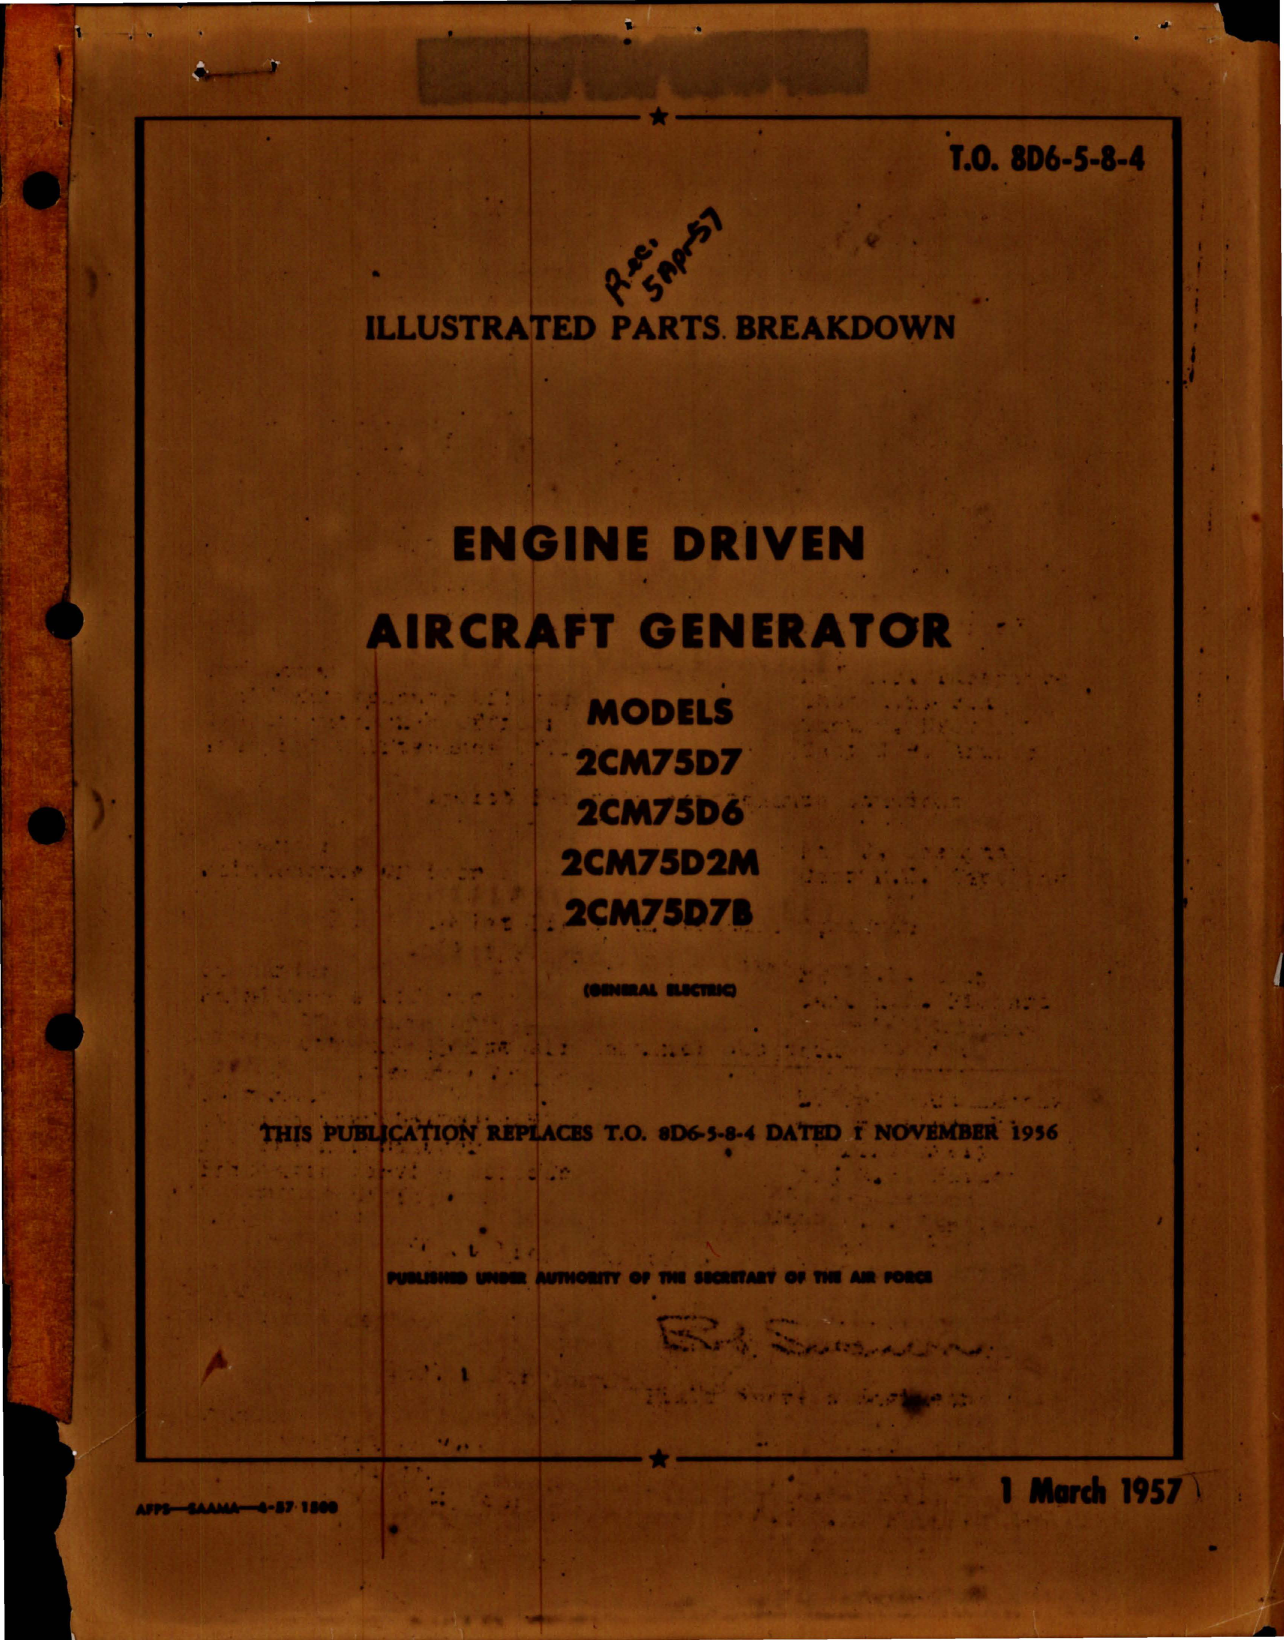 Sample page 1 from AirCorps Library document: Illustrated Parts Breakdown for Engine Driven Aircraft Generator - Models 2CM75D7, 2CM75D6, 2CM75D2M and 2CM75D7B